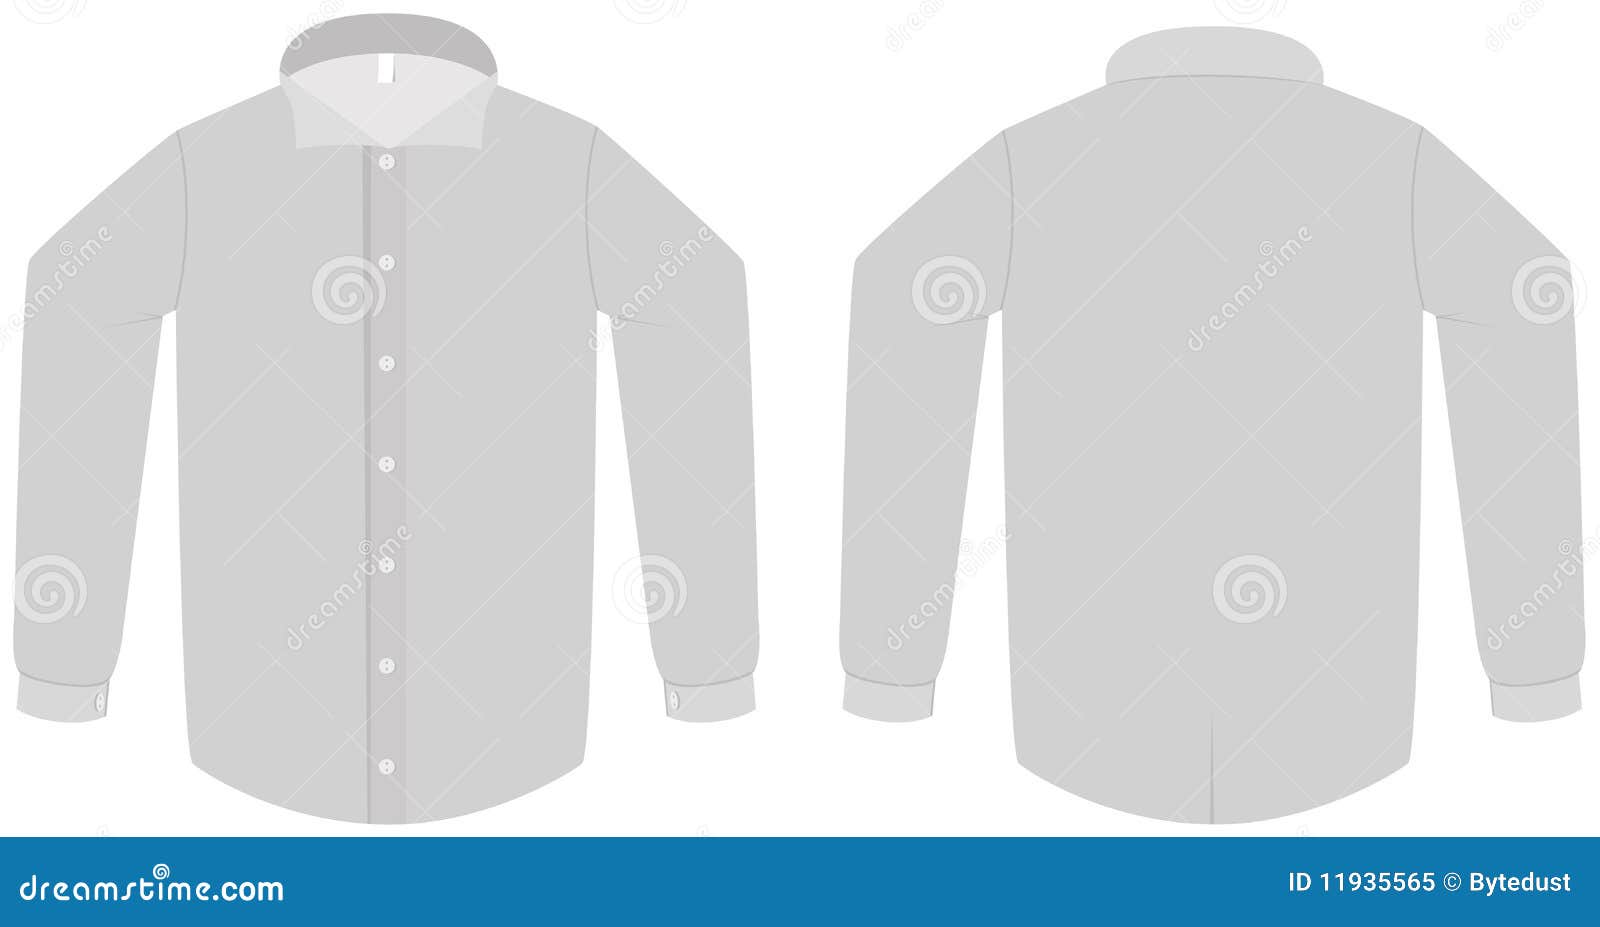 Dress Shirt Or Blouse Template Vector Illustration Royalty Free Stock ...